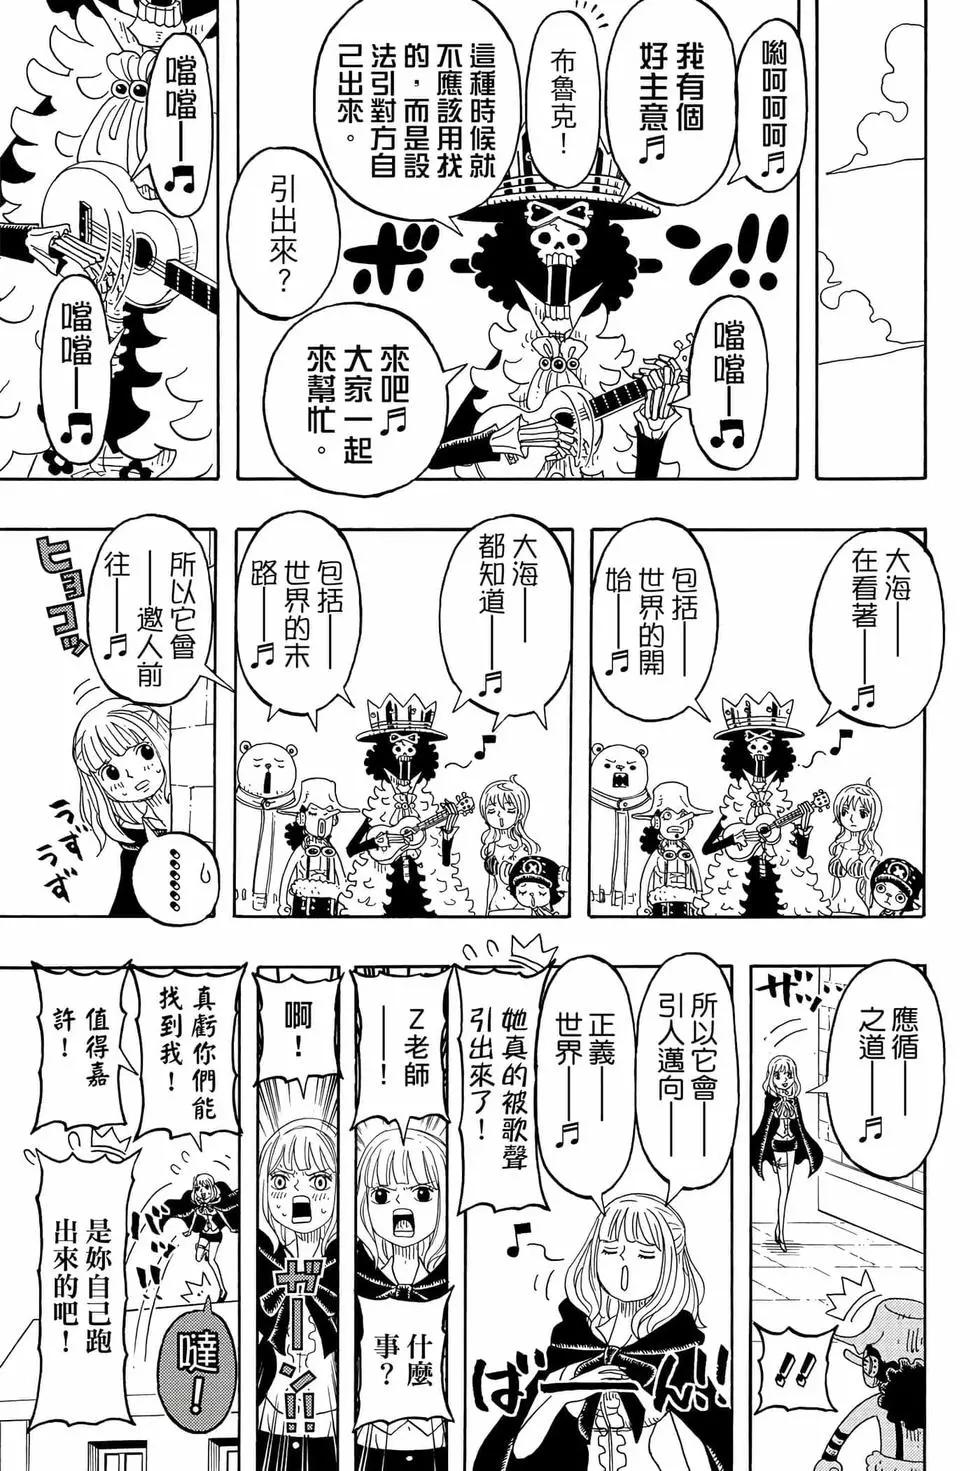 One piece party - 第05卷(1/4) - 2